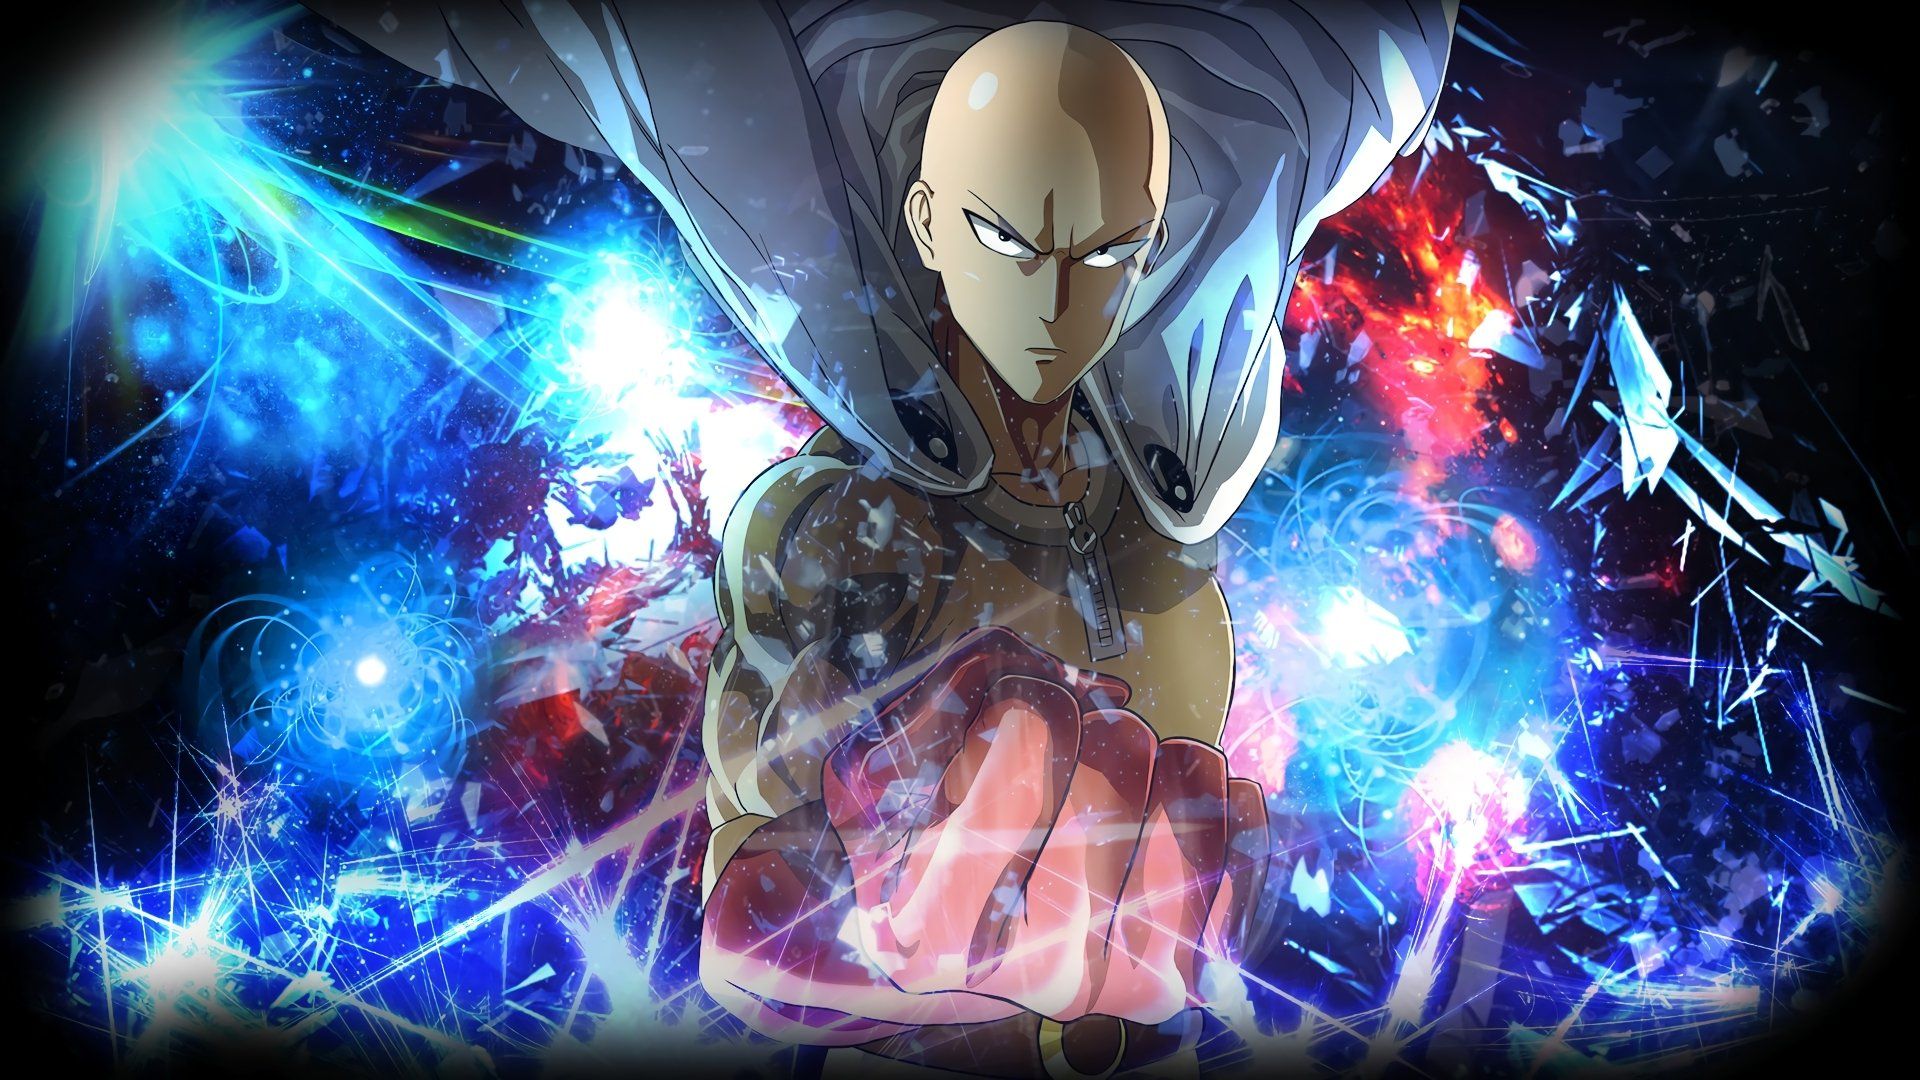 17 One Punch Man Live Wallpapers, Animated Wallpapers - MoeWalls